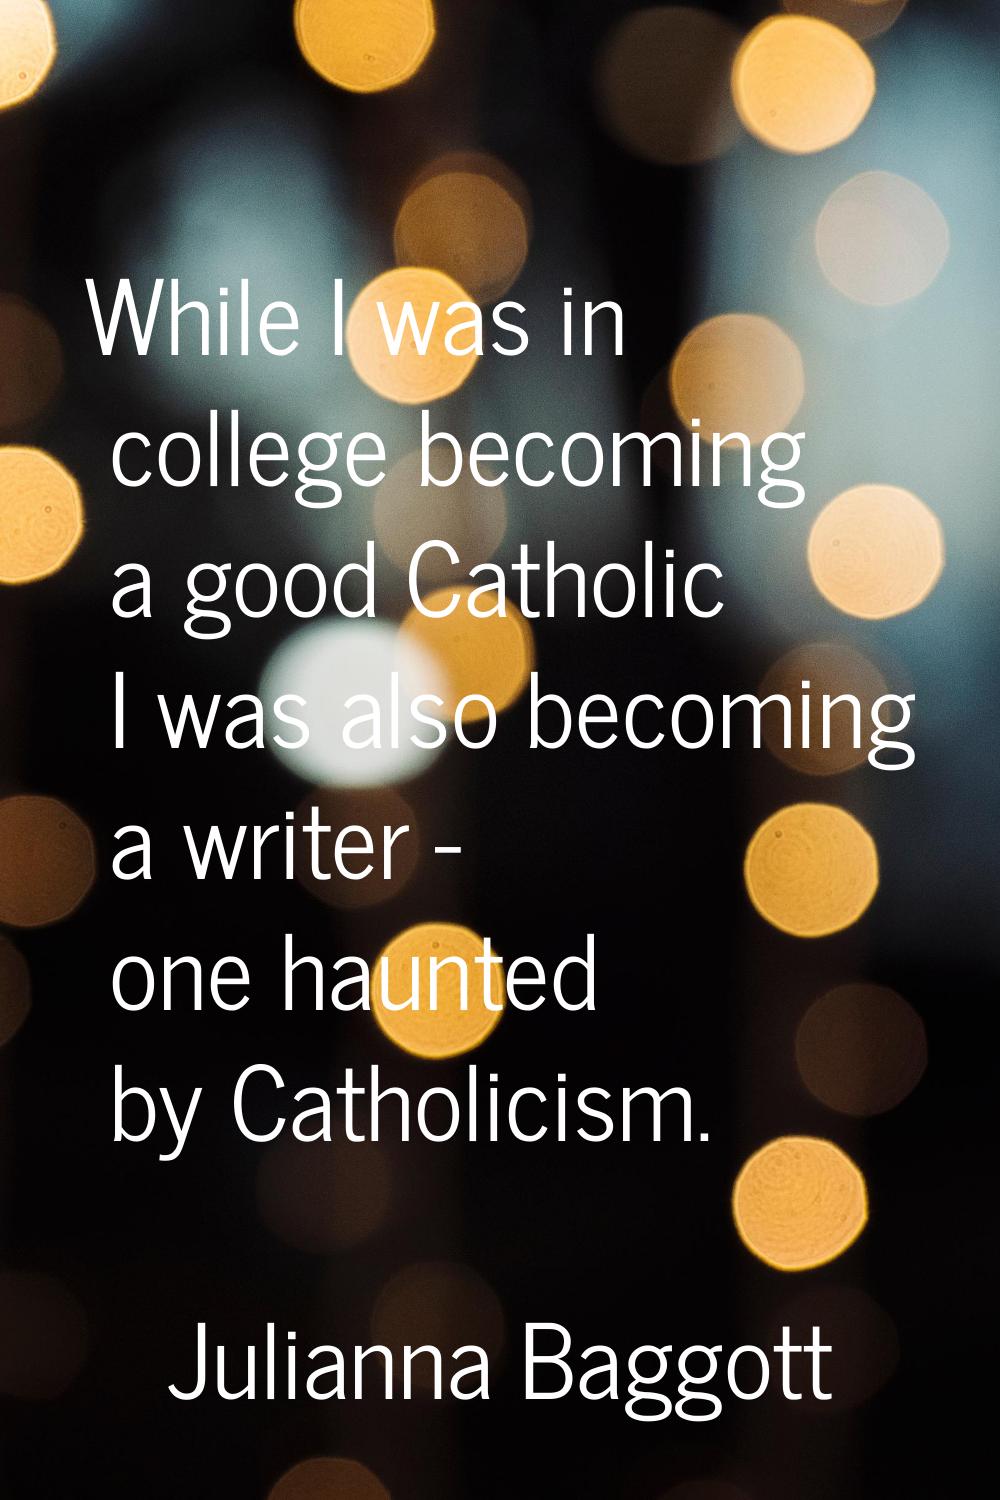 While I was in college becoming a good Catholic I was also becoming a writer - one haunted by Catho